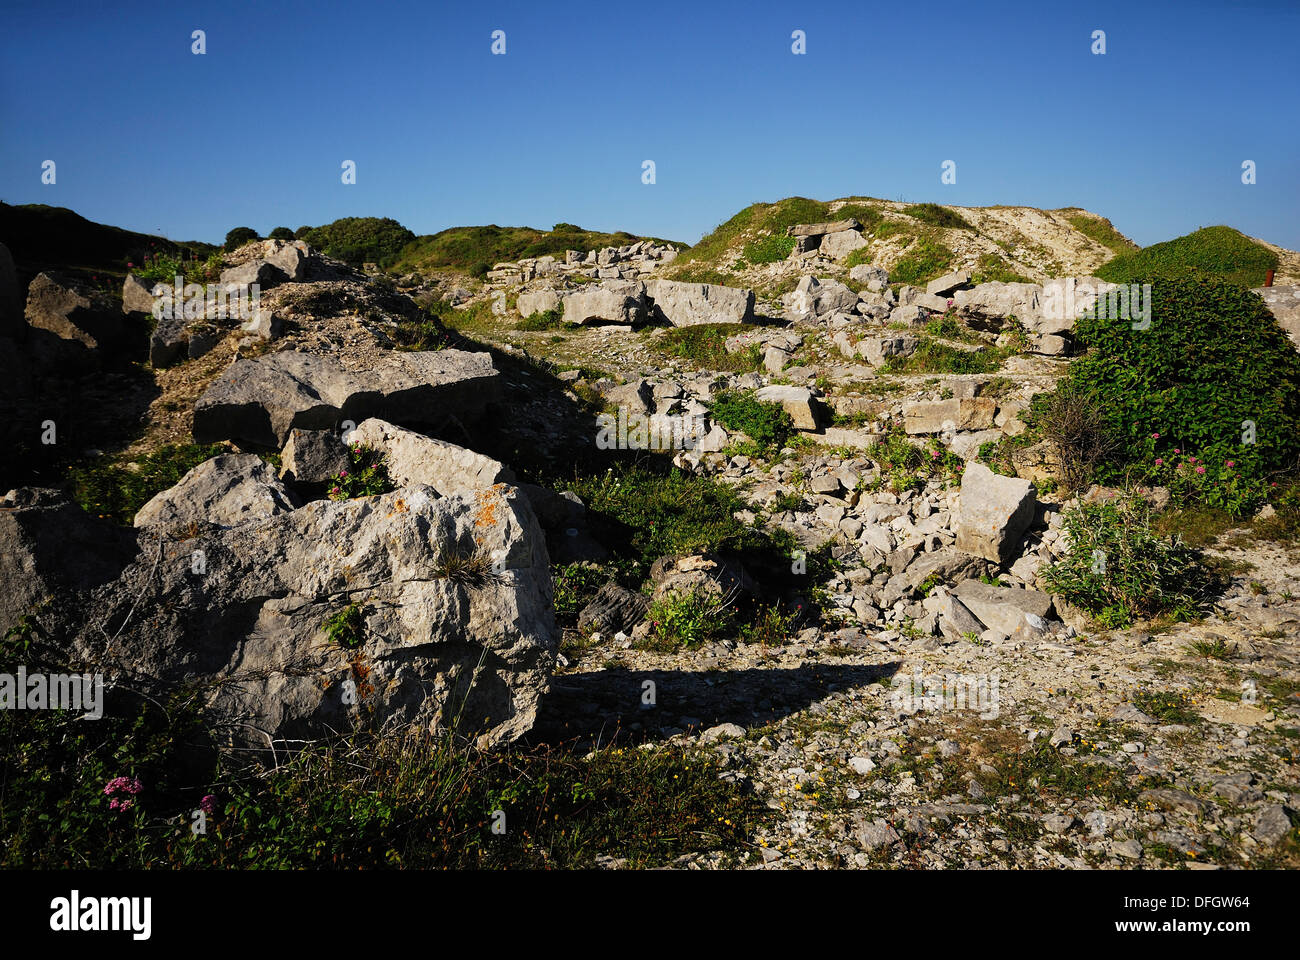 A view of an untidy Portland stone quarry Dorset UK Stock Photo